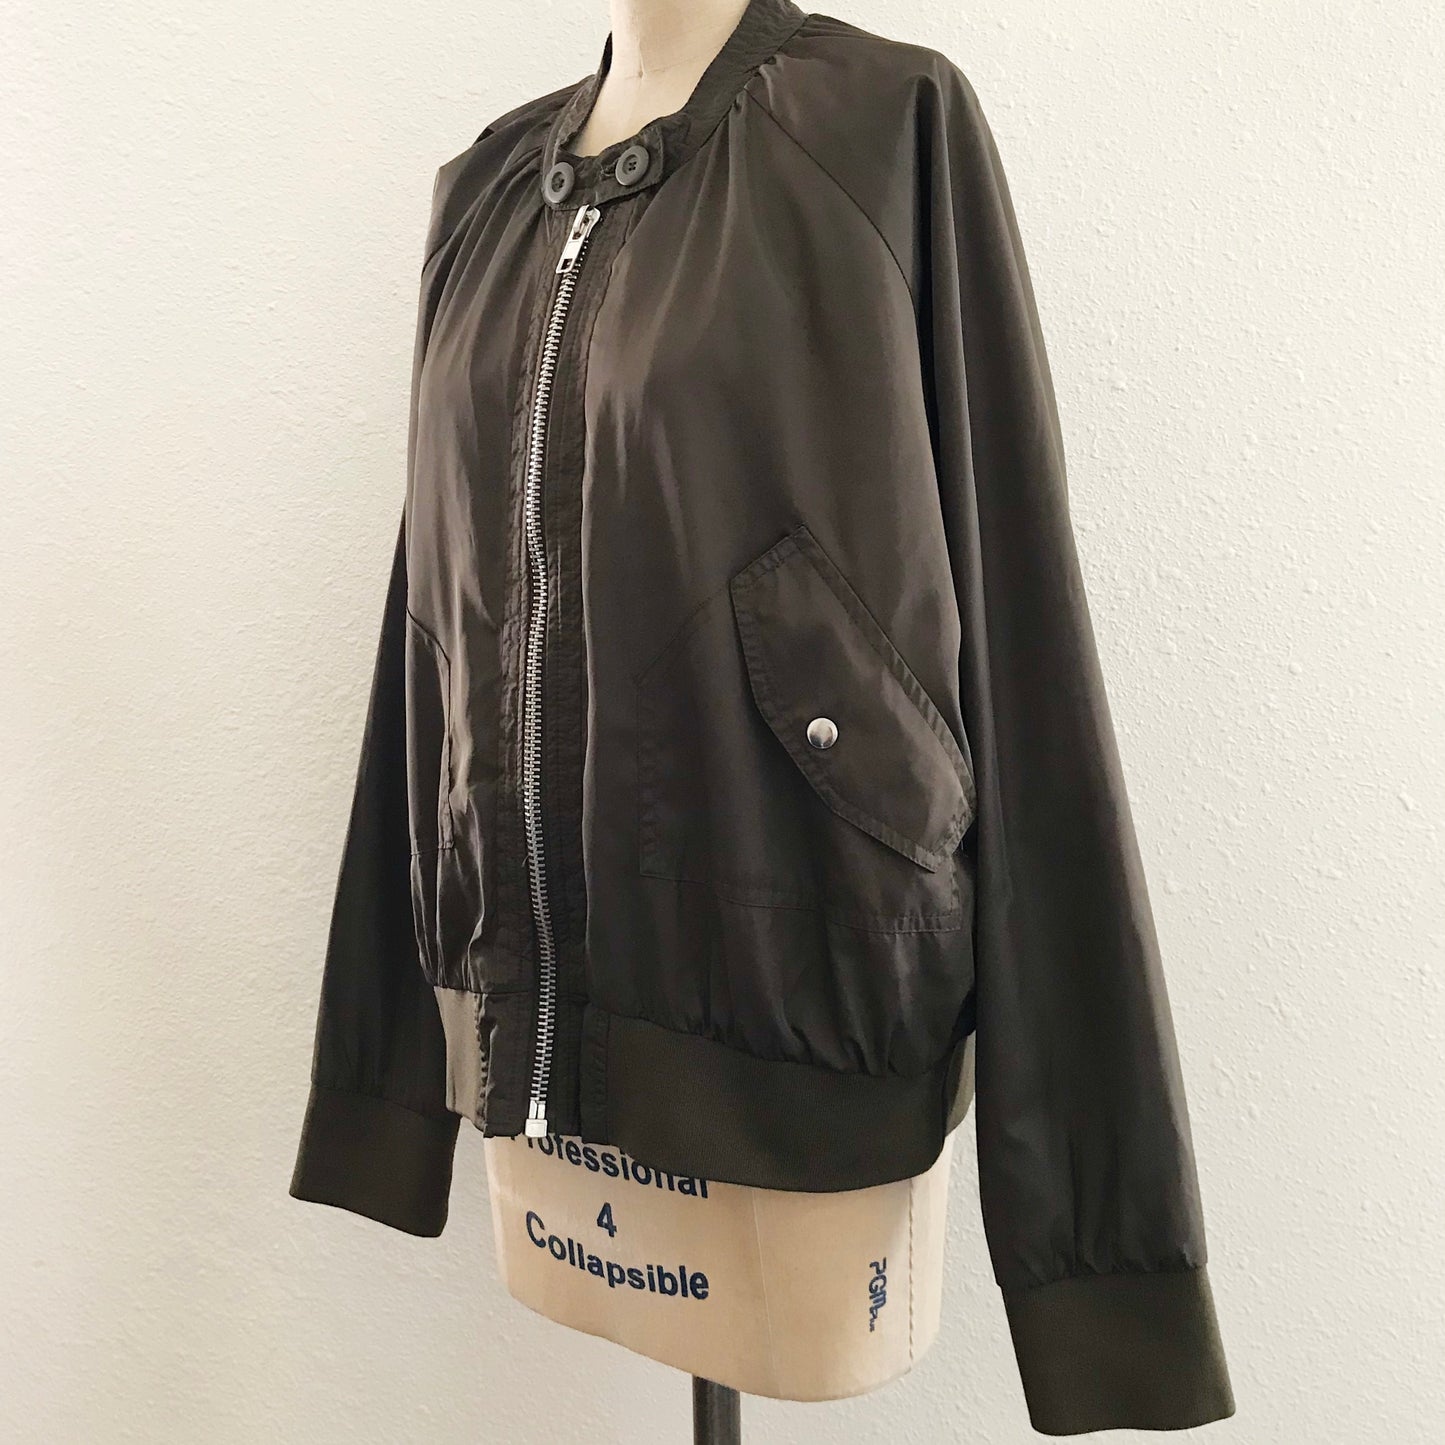 Free People Olive Green Military Bomber Jacket